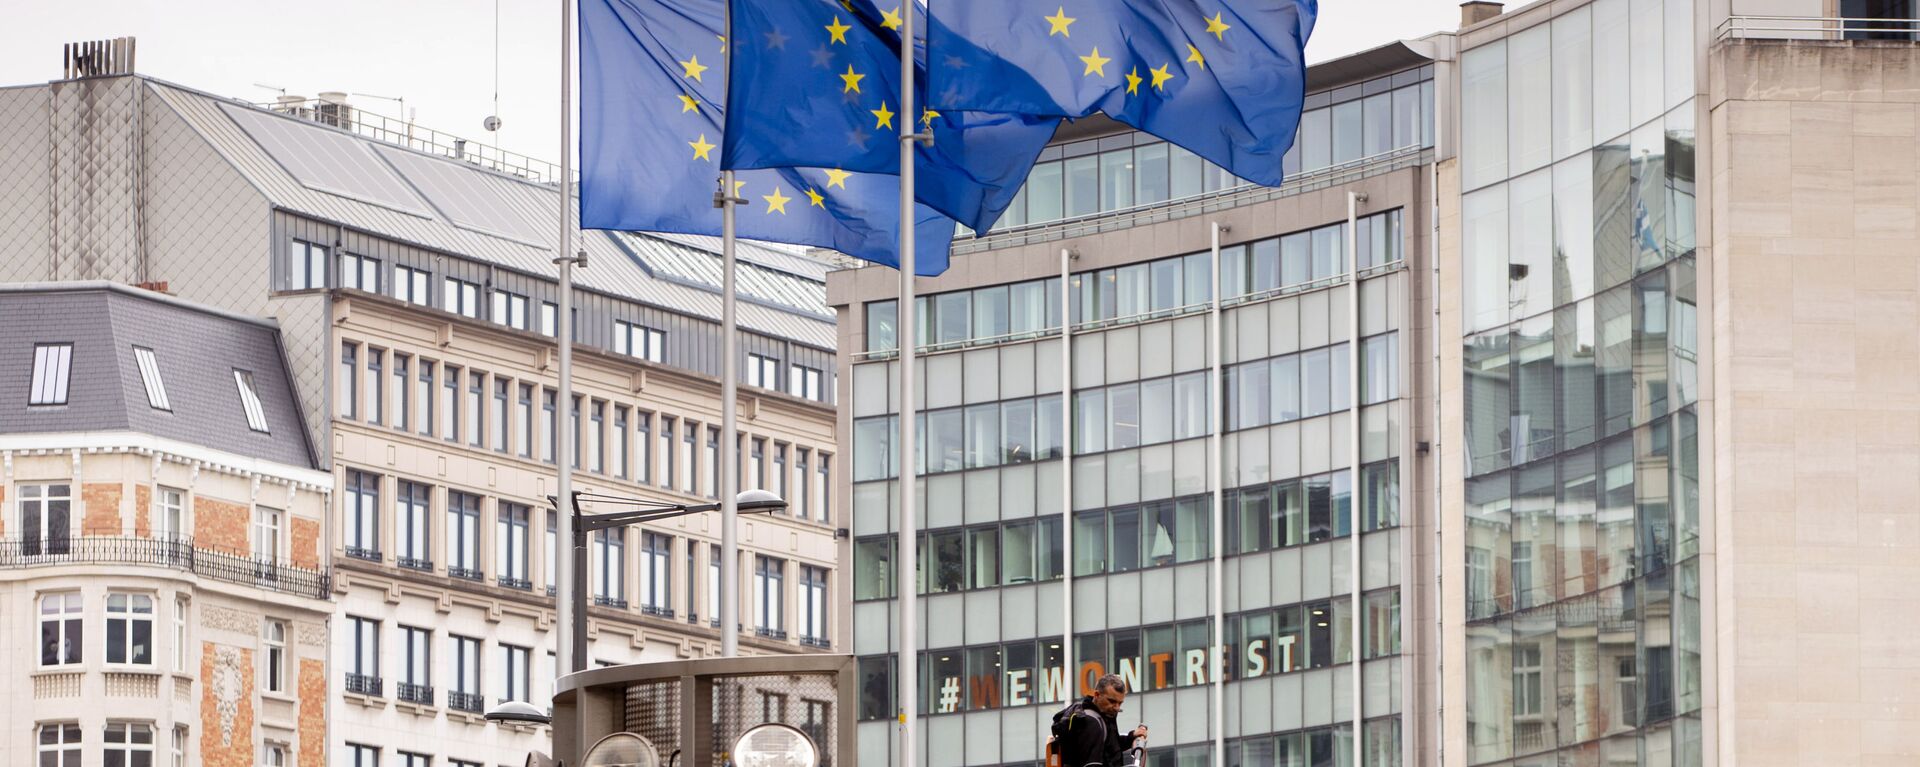 European Union flags flap in the wind as two gardeners work on the outside of EU headquarters in Brussels, Wednesday, Sept. 11, 2019.  - Sputnik International, 1920, 27.10.2022